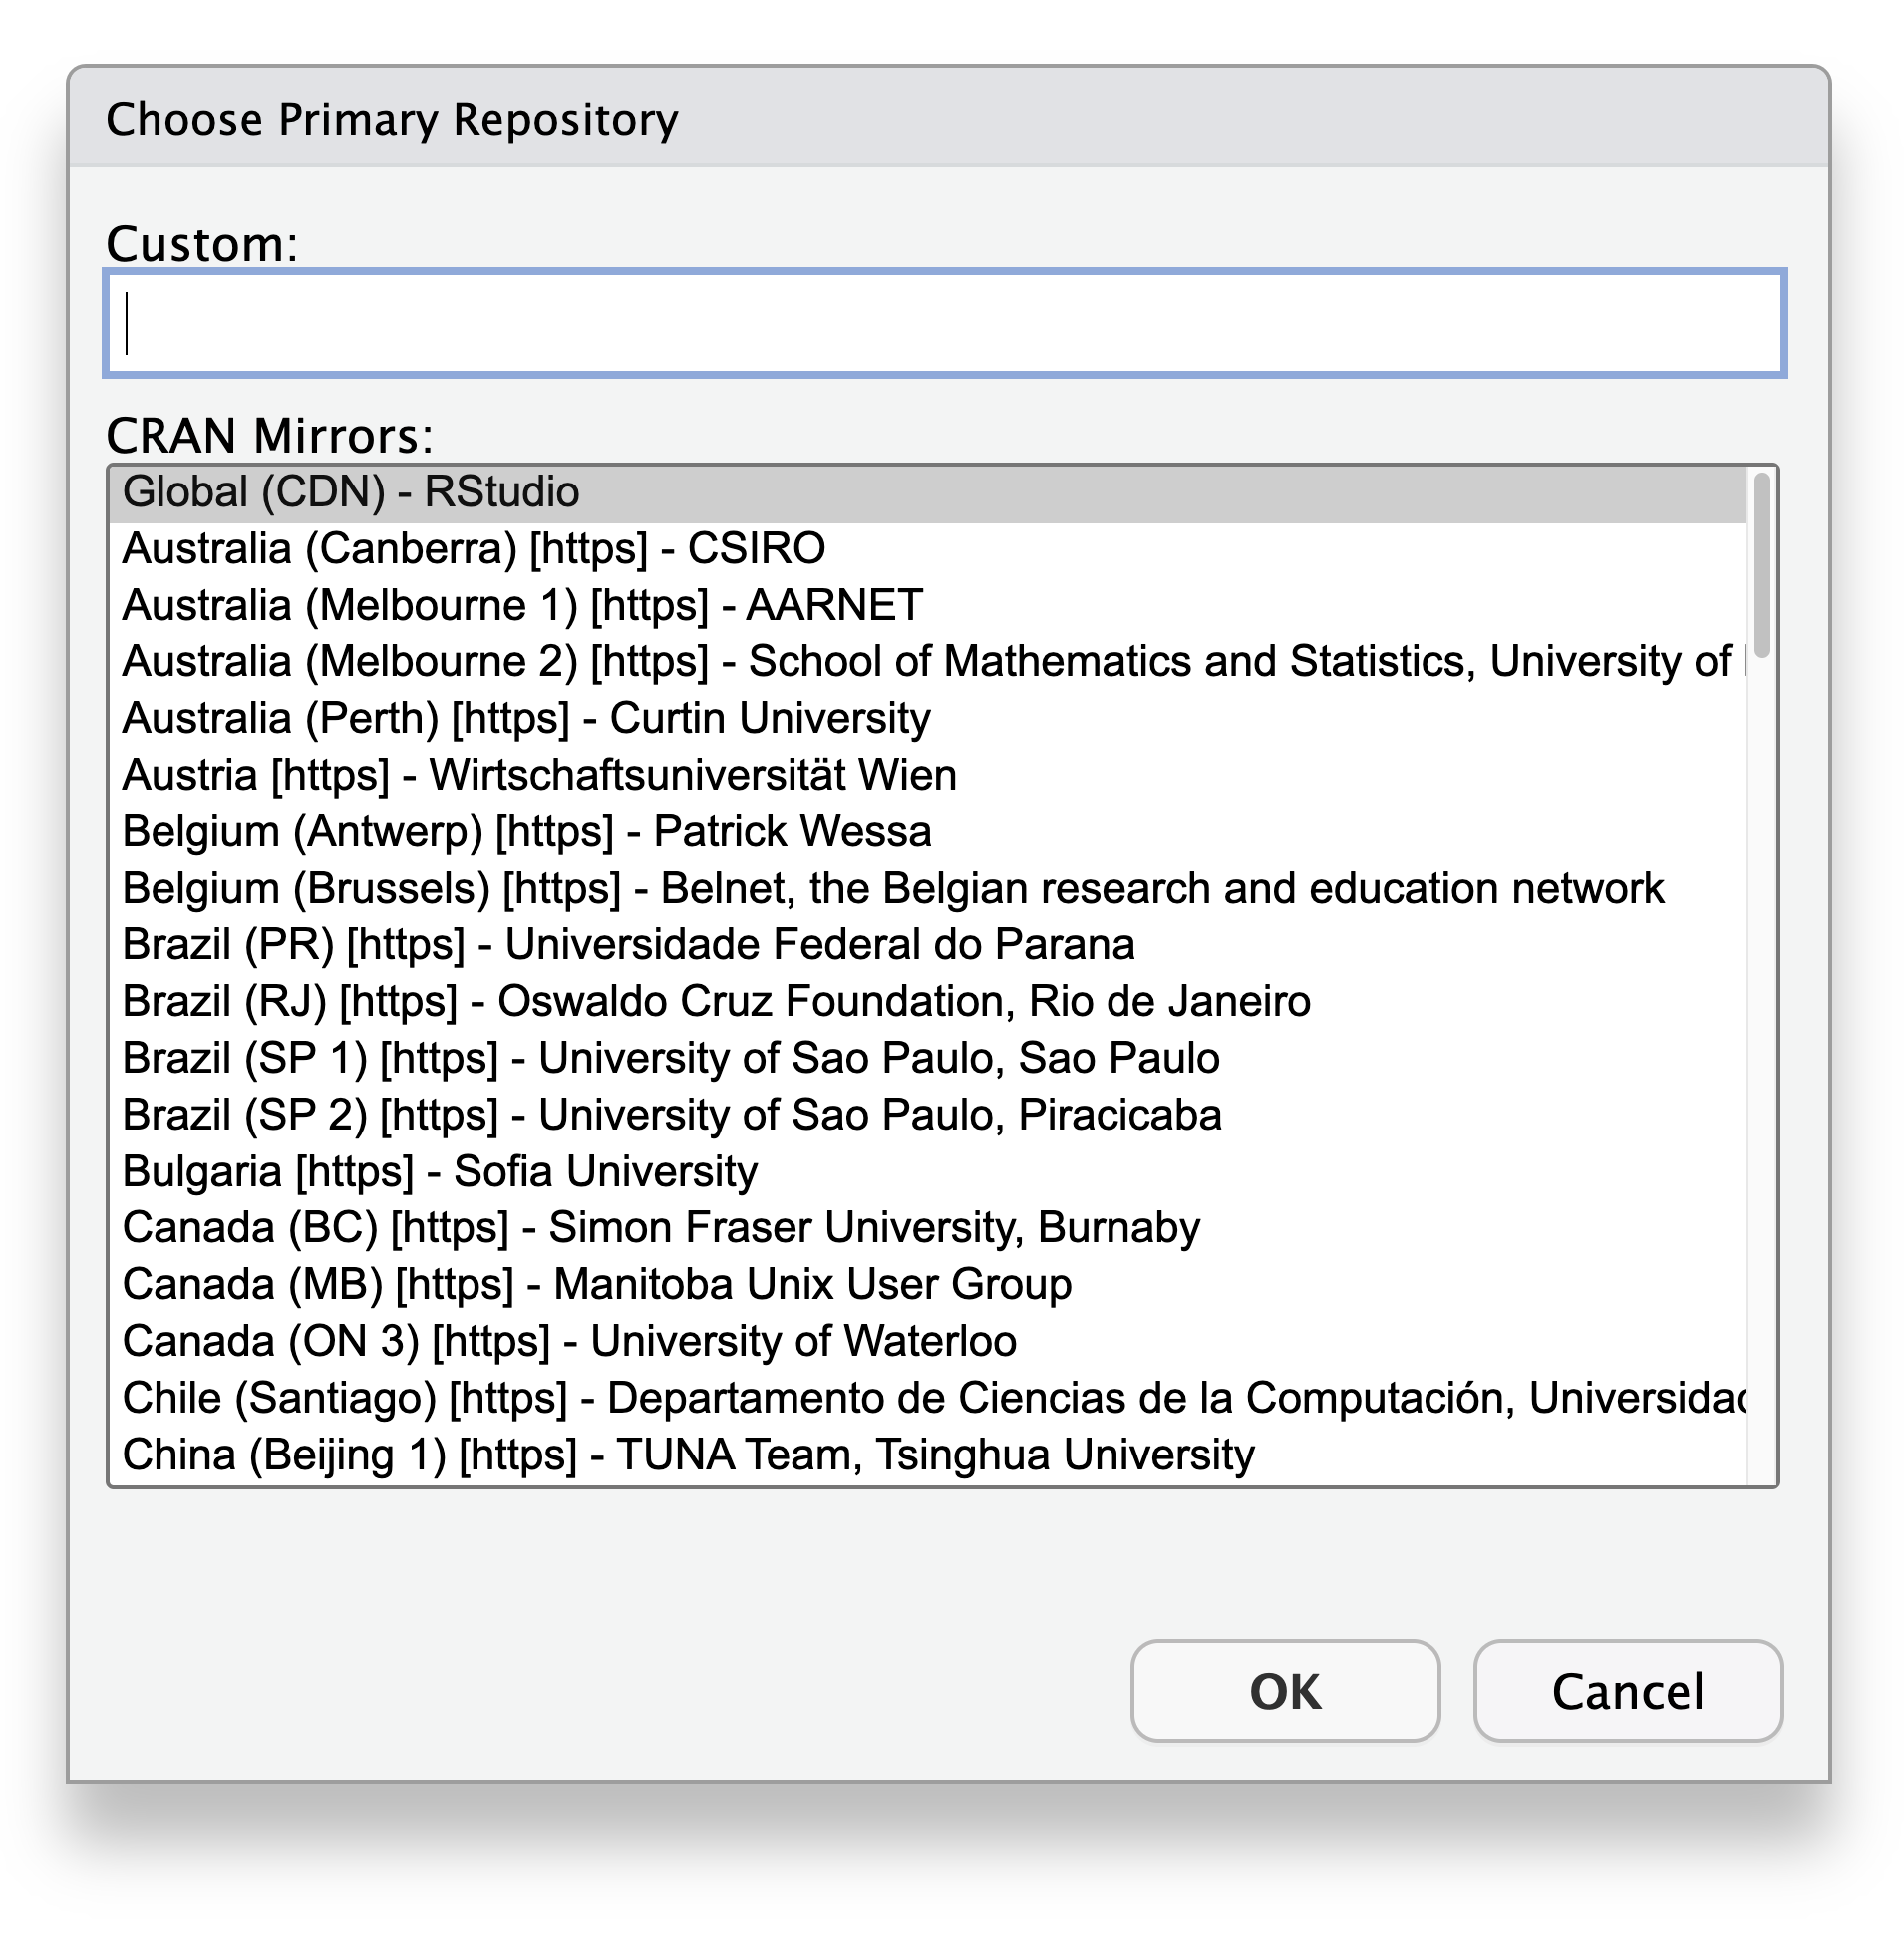 The menu for Choosing an alternative Primary Repository